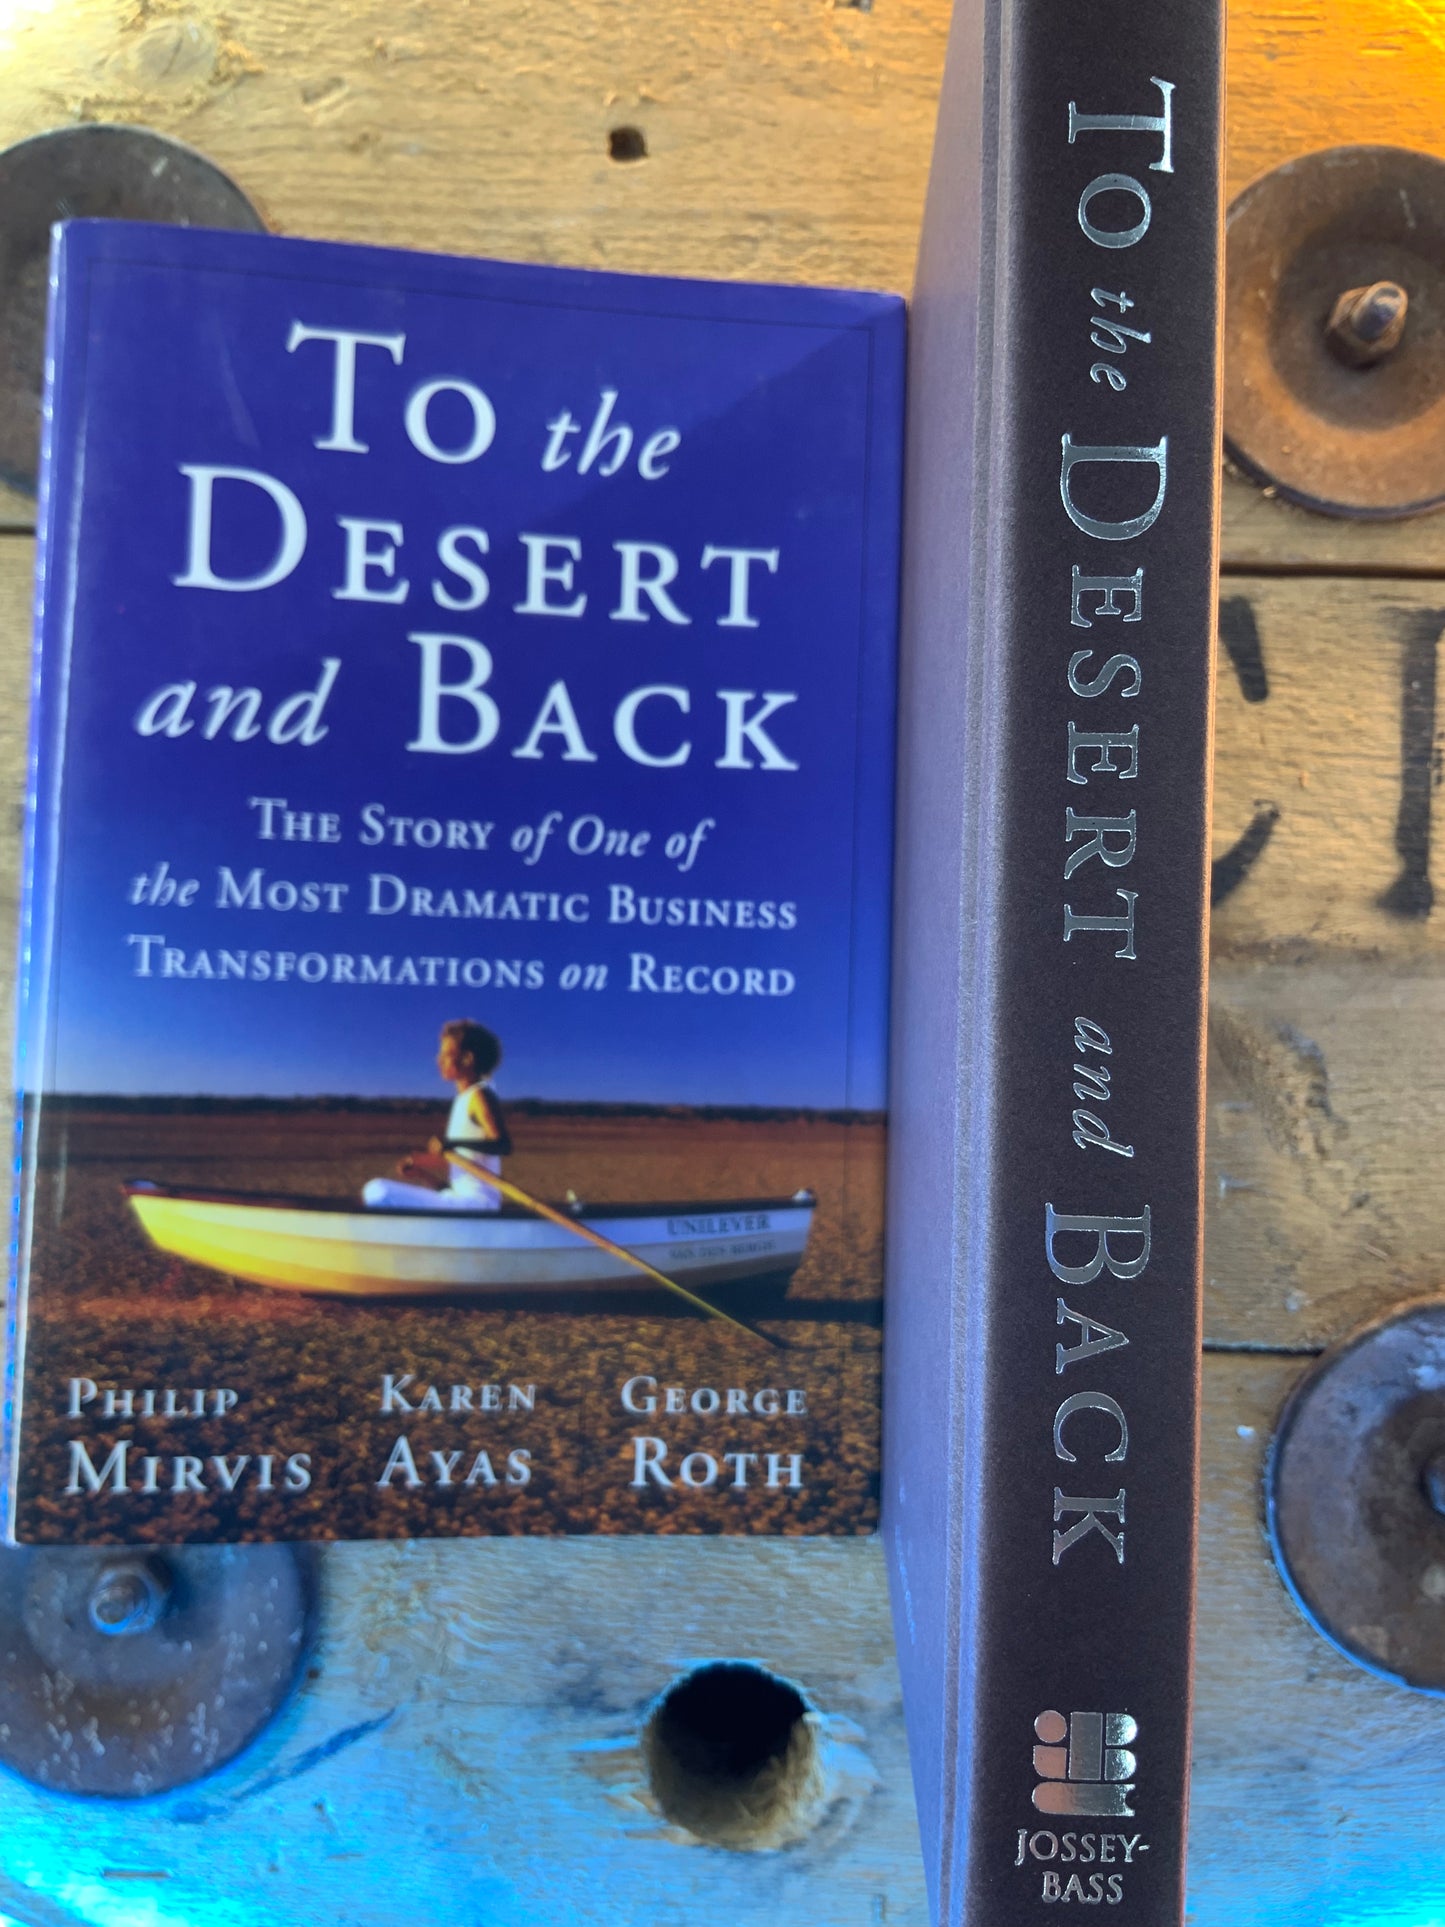 To the desert and back : the story of one of the most dramatic business transformations on record